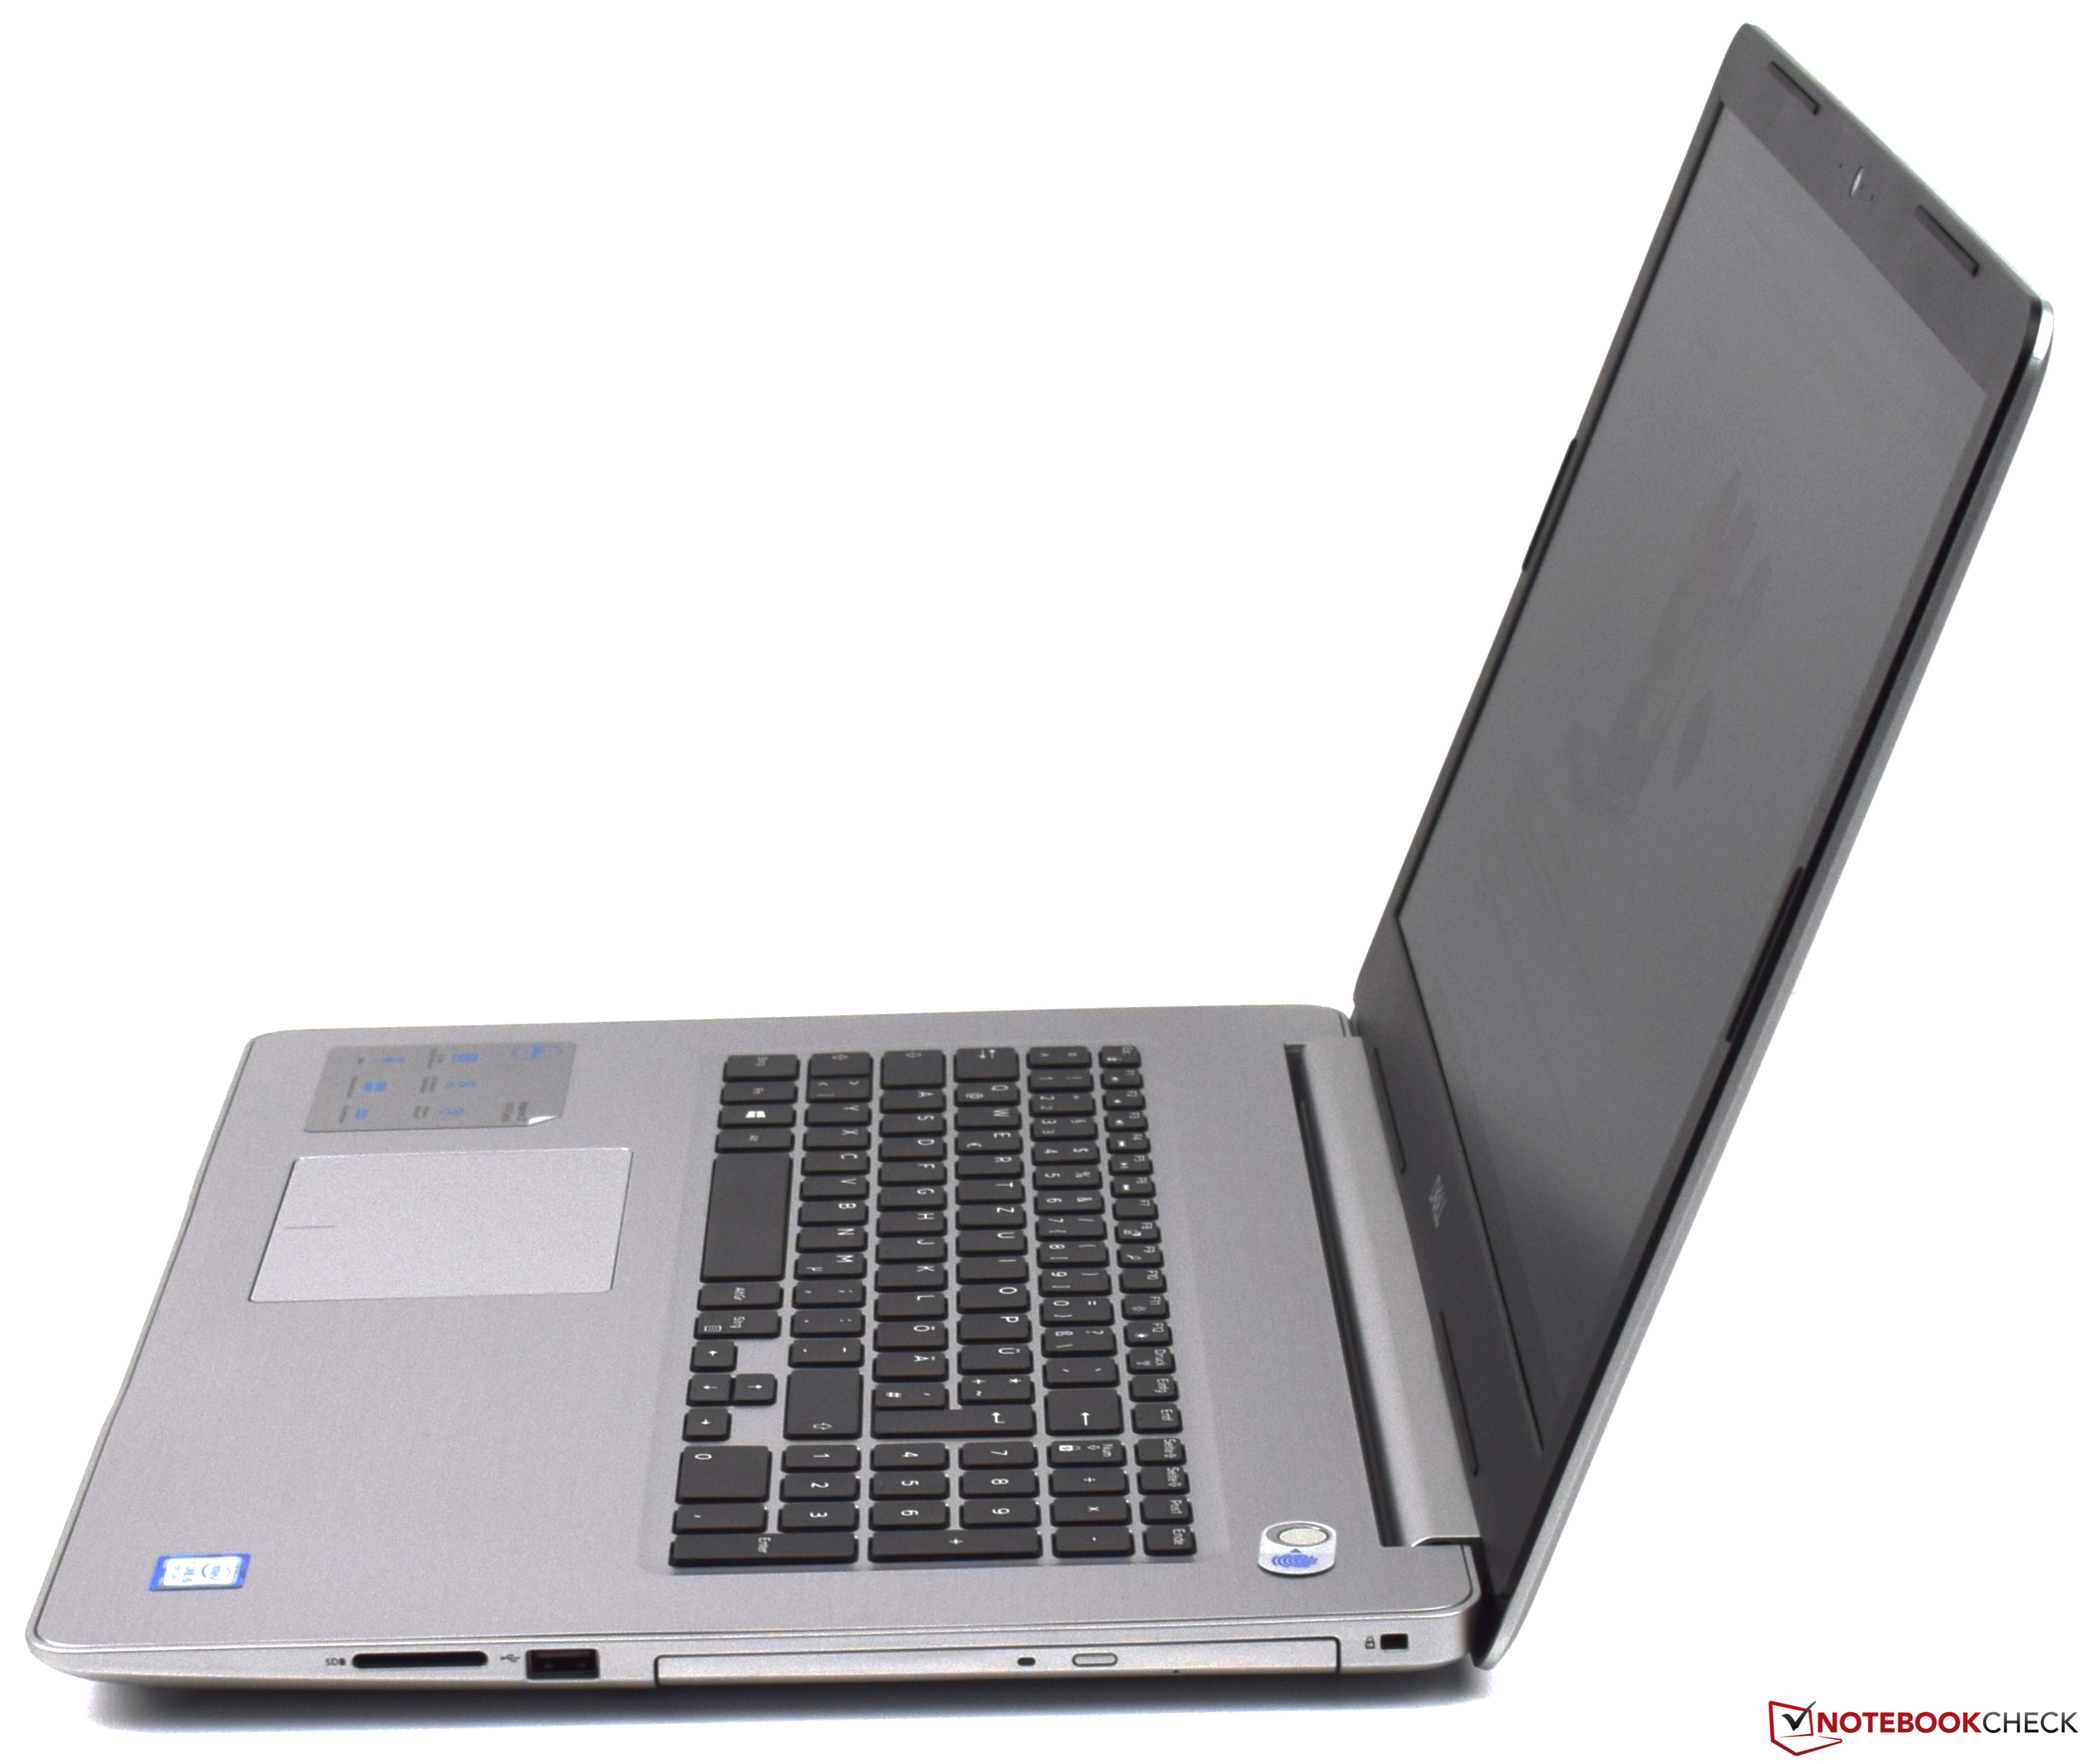 Dell Inspiron 17-5770-0357 (8250U, SSD, HDD, FHD) Laptop Review